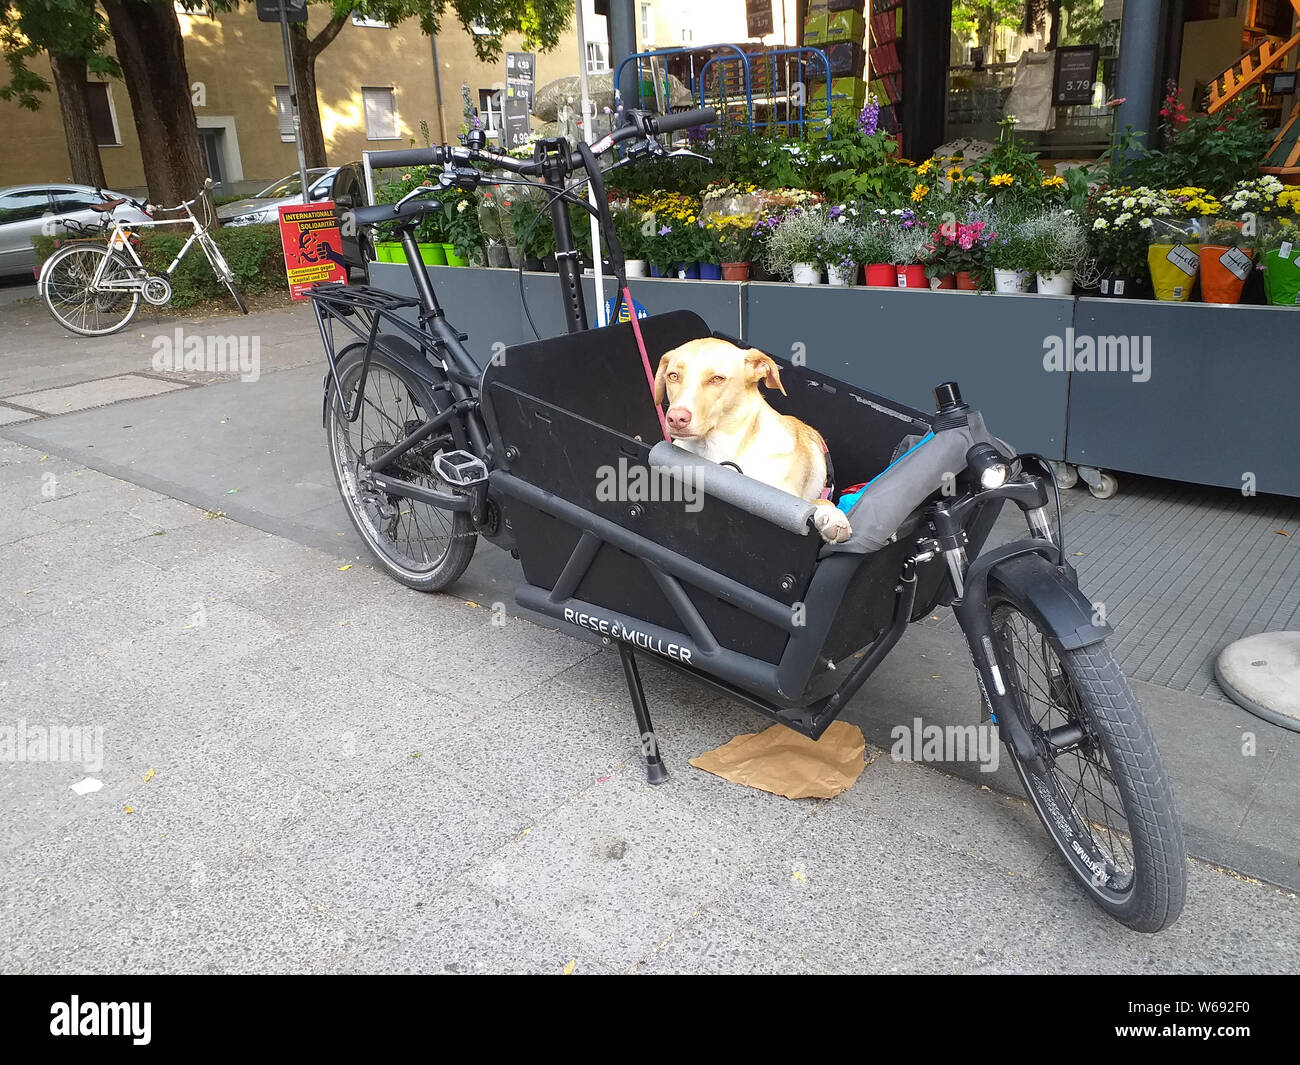 Dog in cargo bike with bike trailer for dogs. Dog focussing camera, waiting in front of shop. Stock Photo